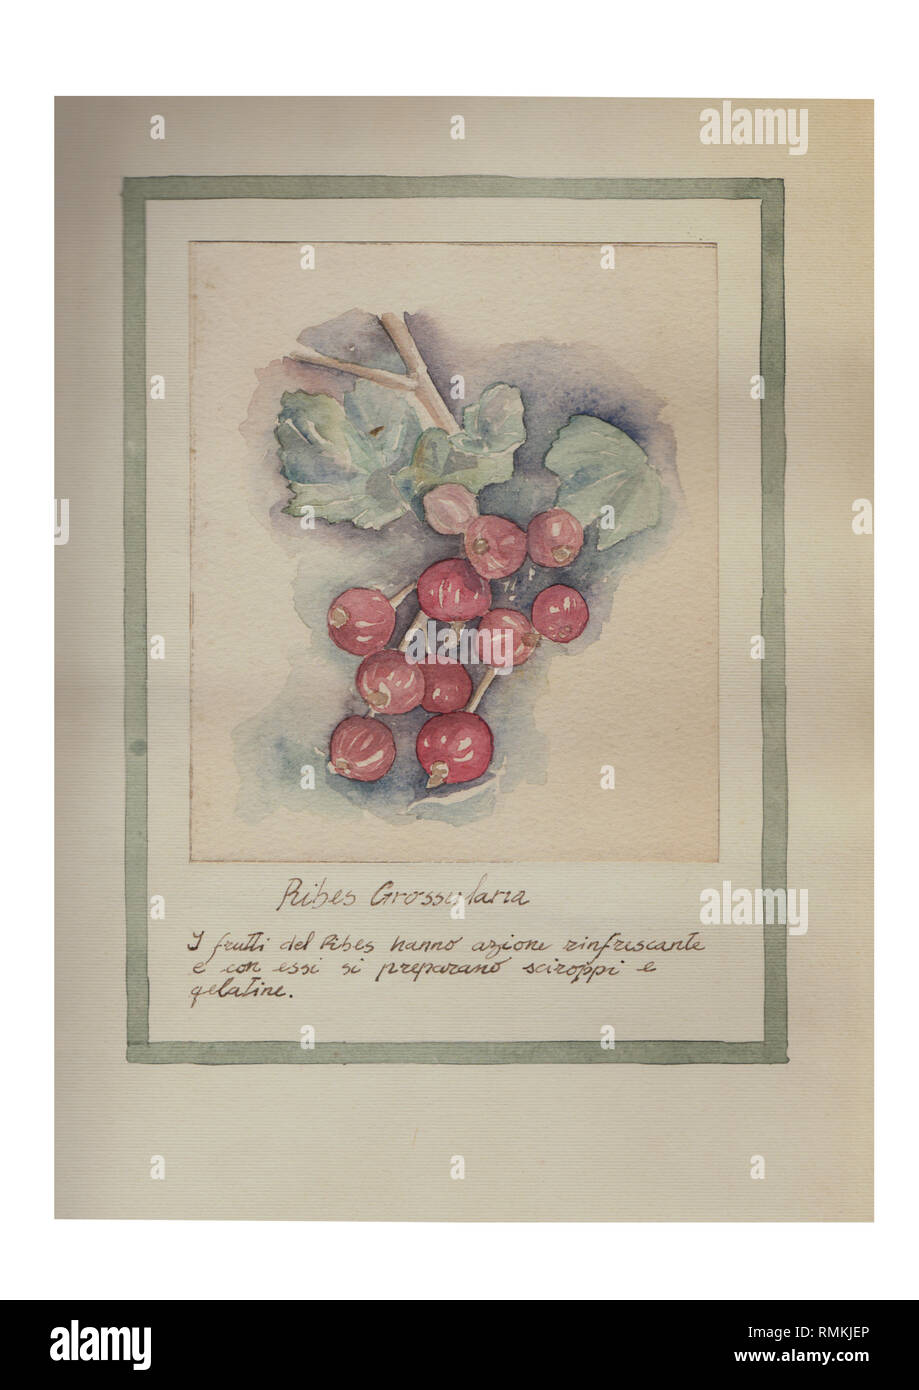 The fruits of the Ribes have refreshing and with them prepare syrups Hand drawn watercolor painting decorative -Ribes Grossularia Stock Photo